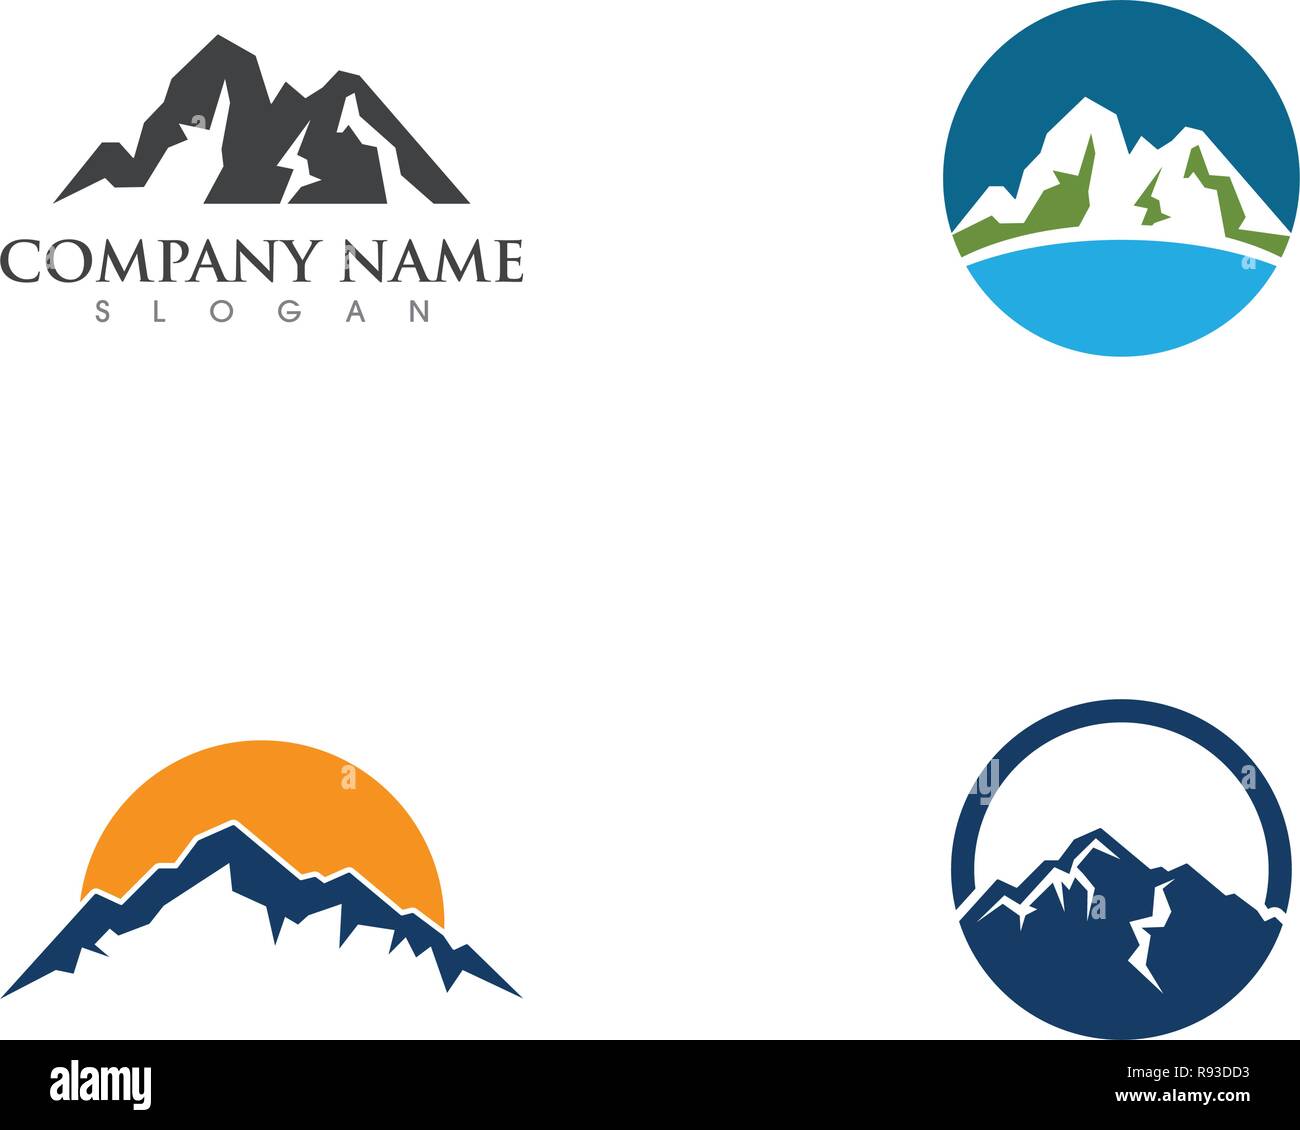 Triangle mountain Cut Out Stock Images & Pictures - Alamy